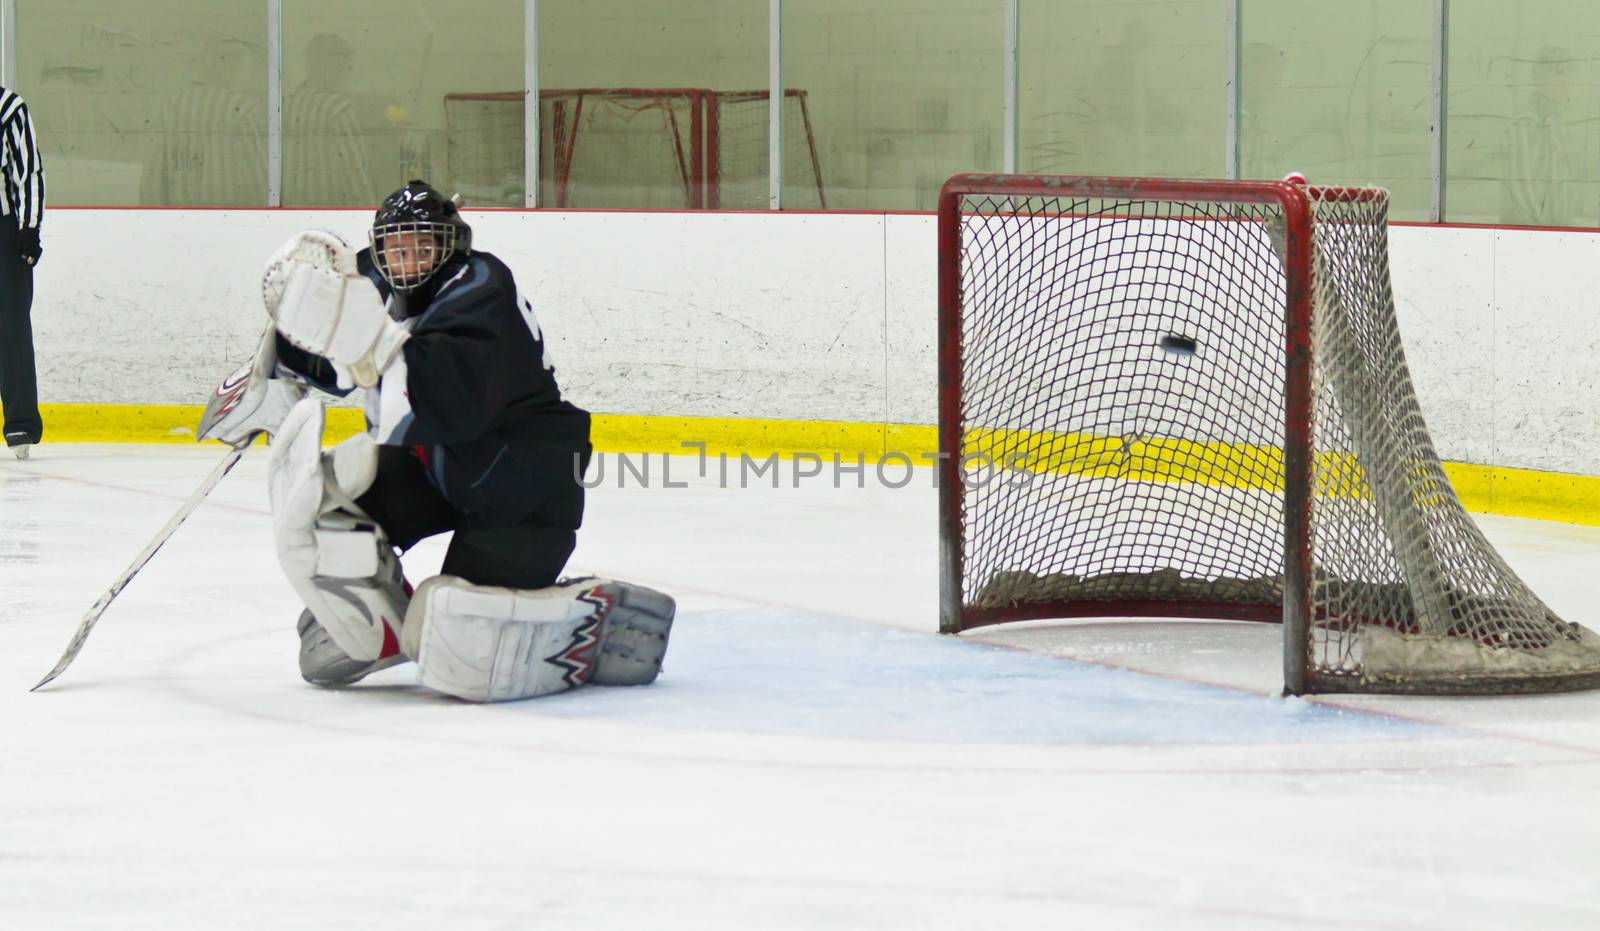 Puck gets past the goalie during an ice hockey game by bigjohn36